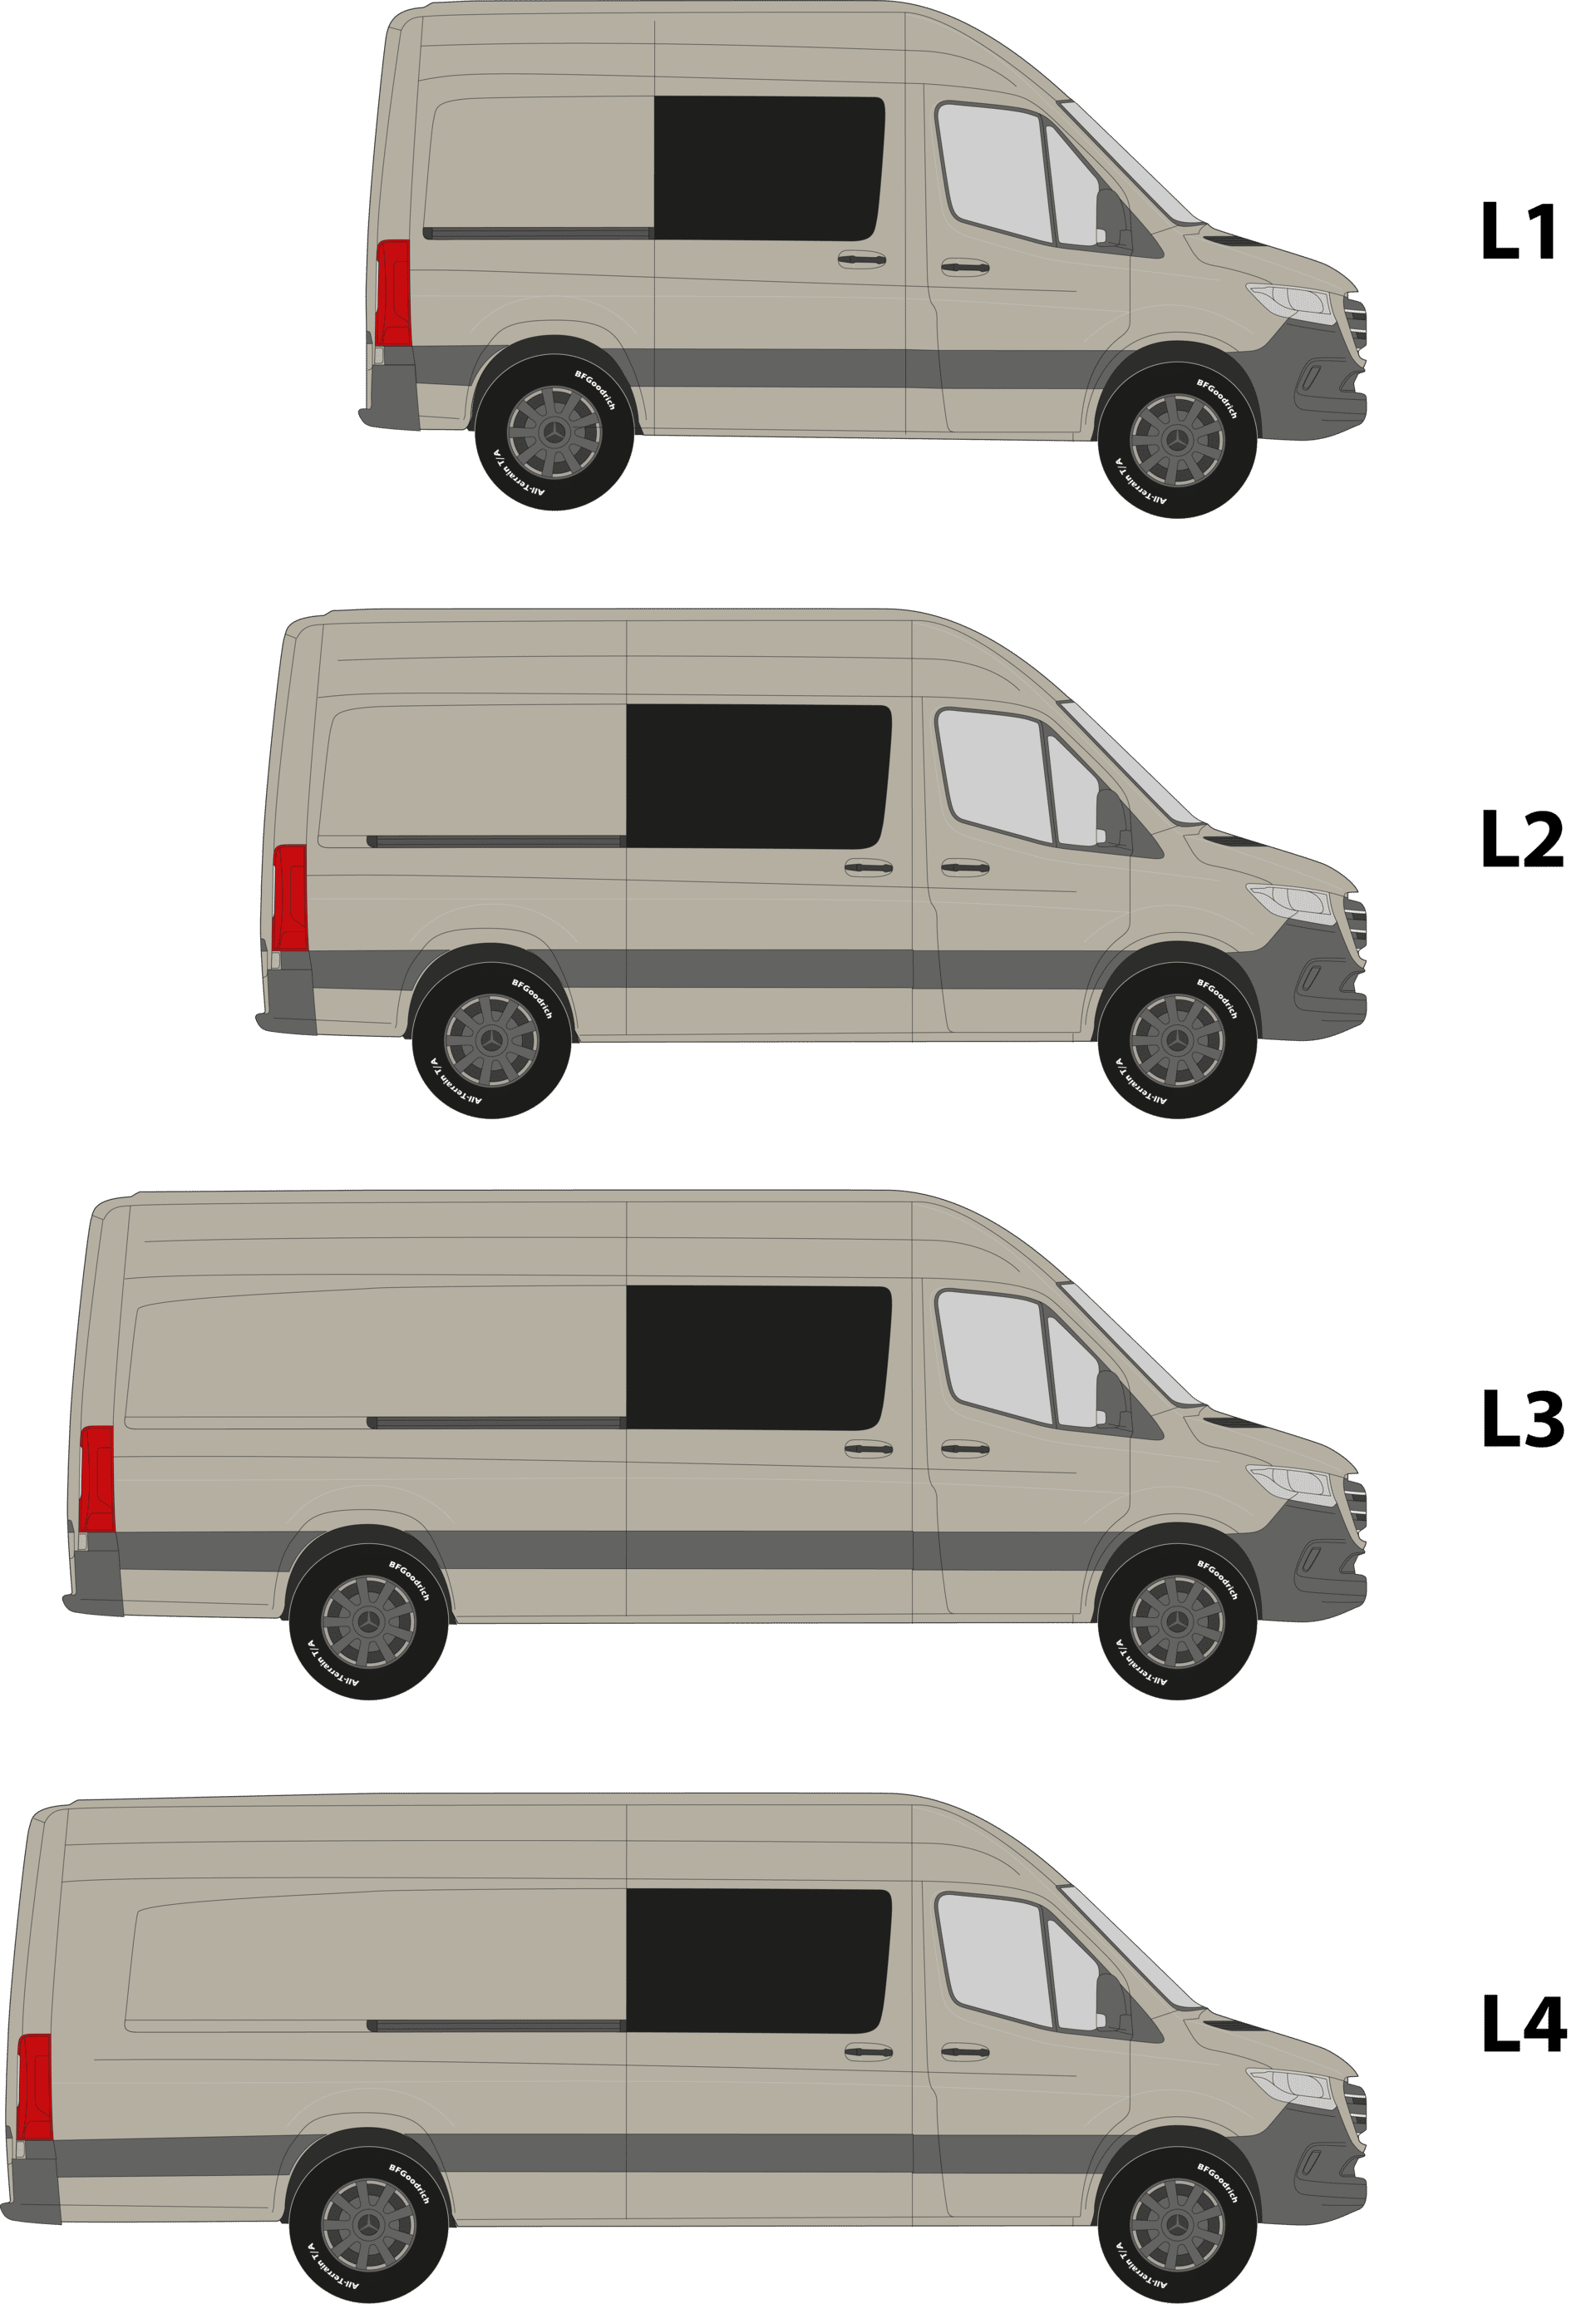 A guide to the different lengths and heights of the Mercedes